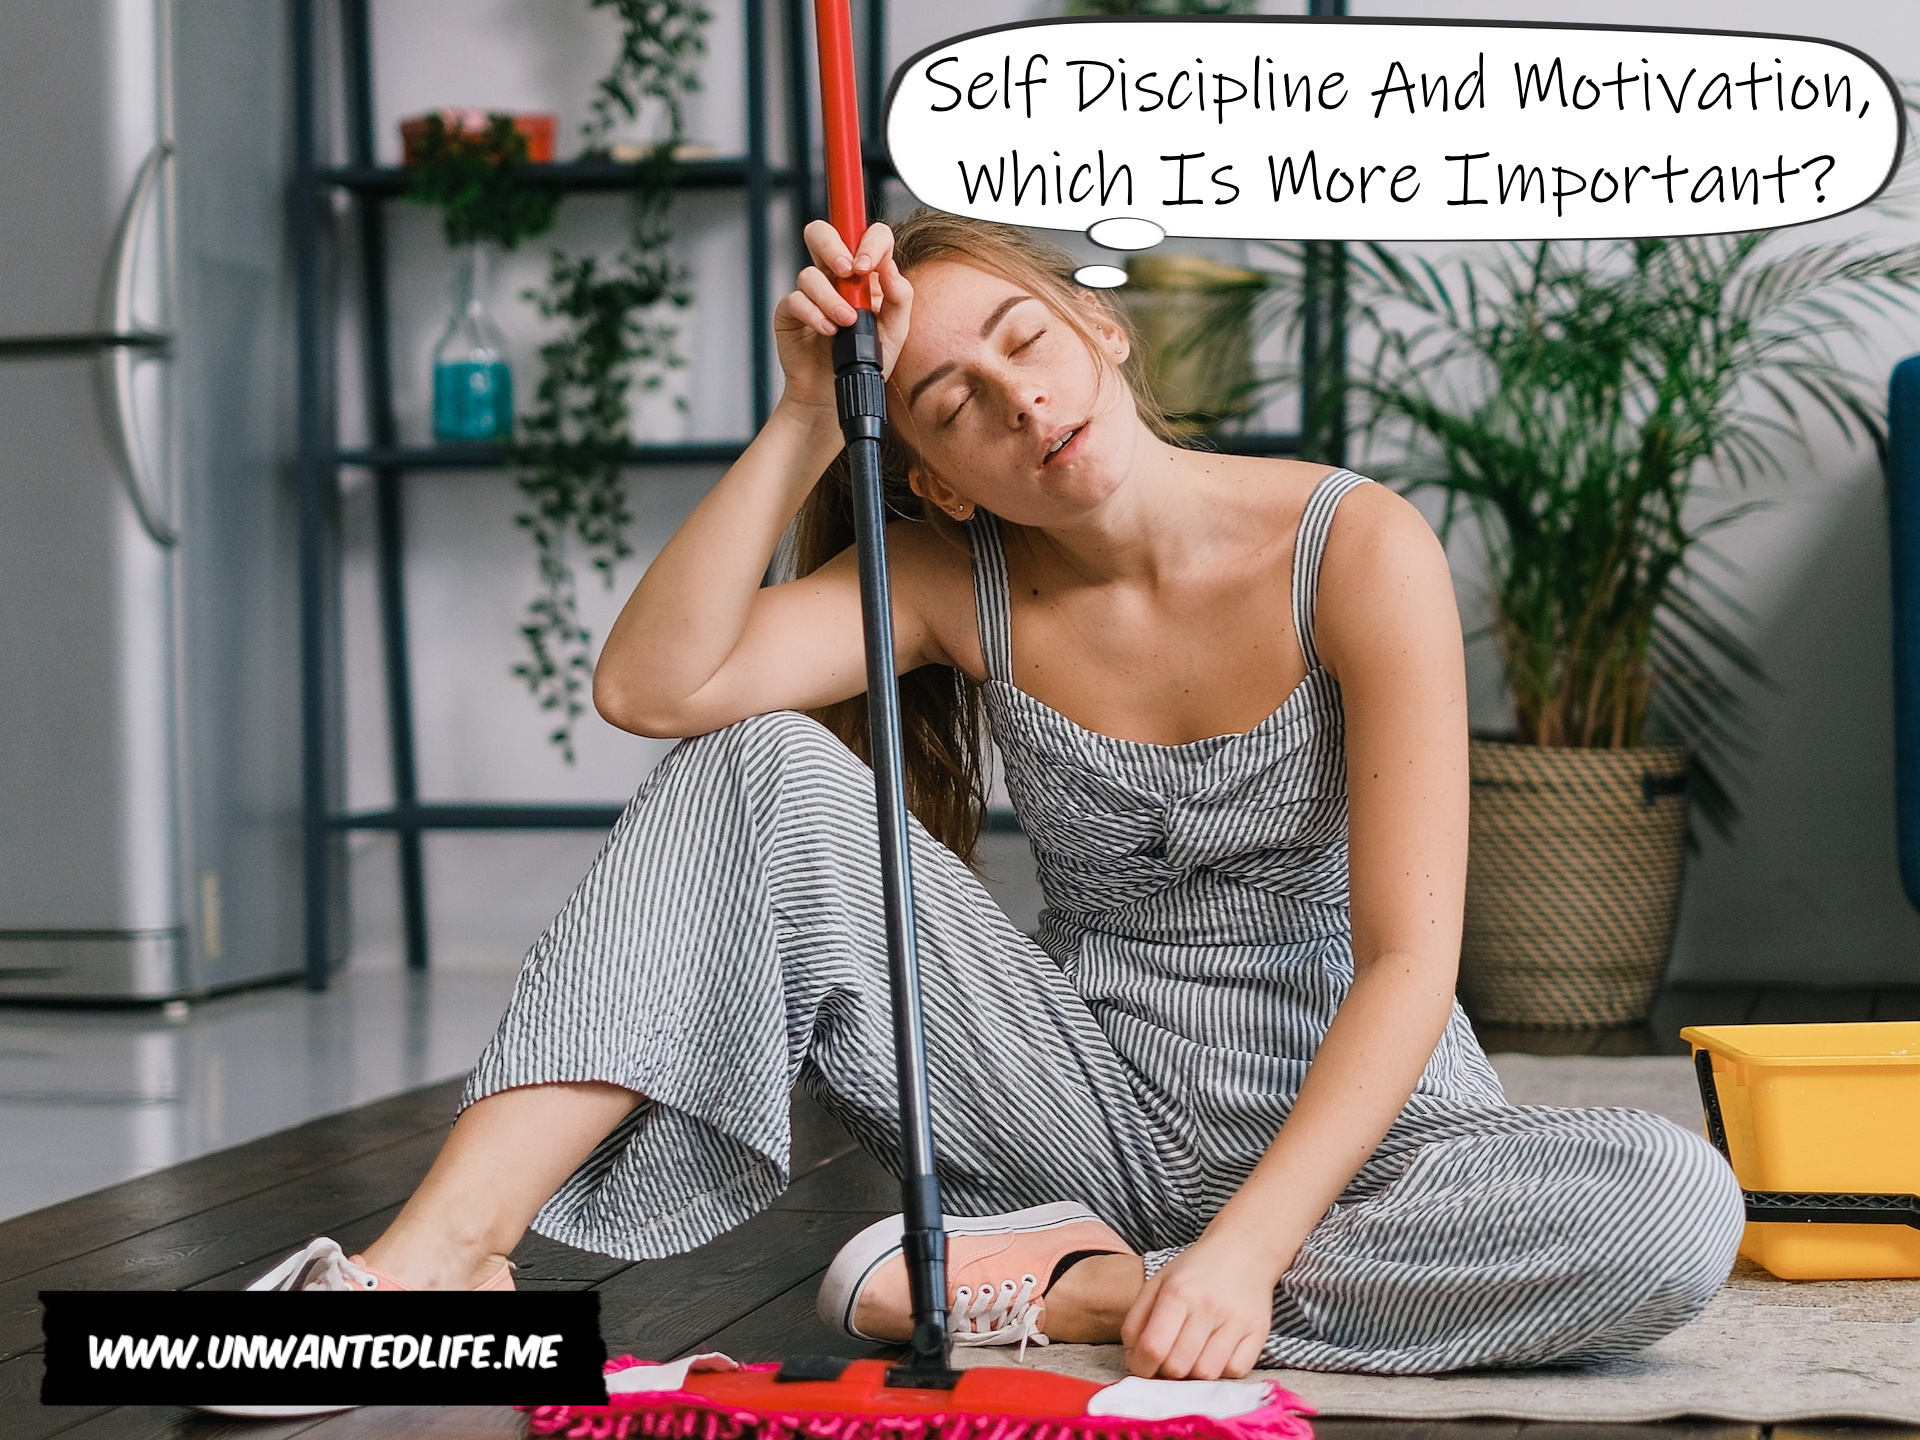 A photo of a White woman sitting on the floor looking unmotivated to clean the floor while holding a mob, to represent the topic of the article - Self Discipline And Motivation, Which Is More Important?